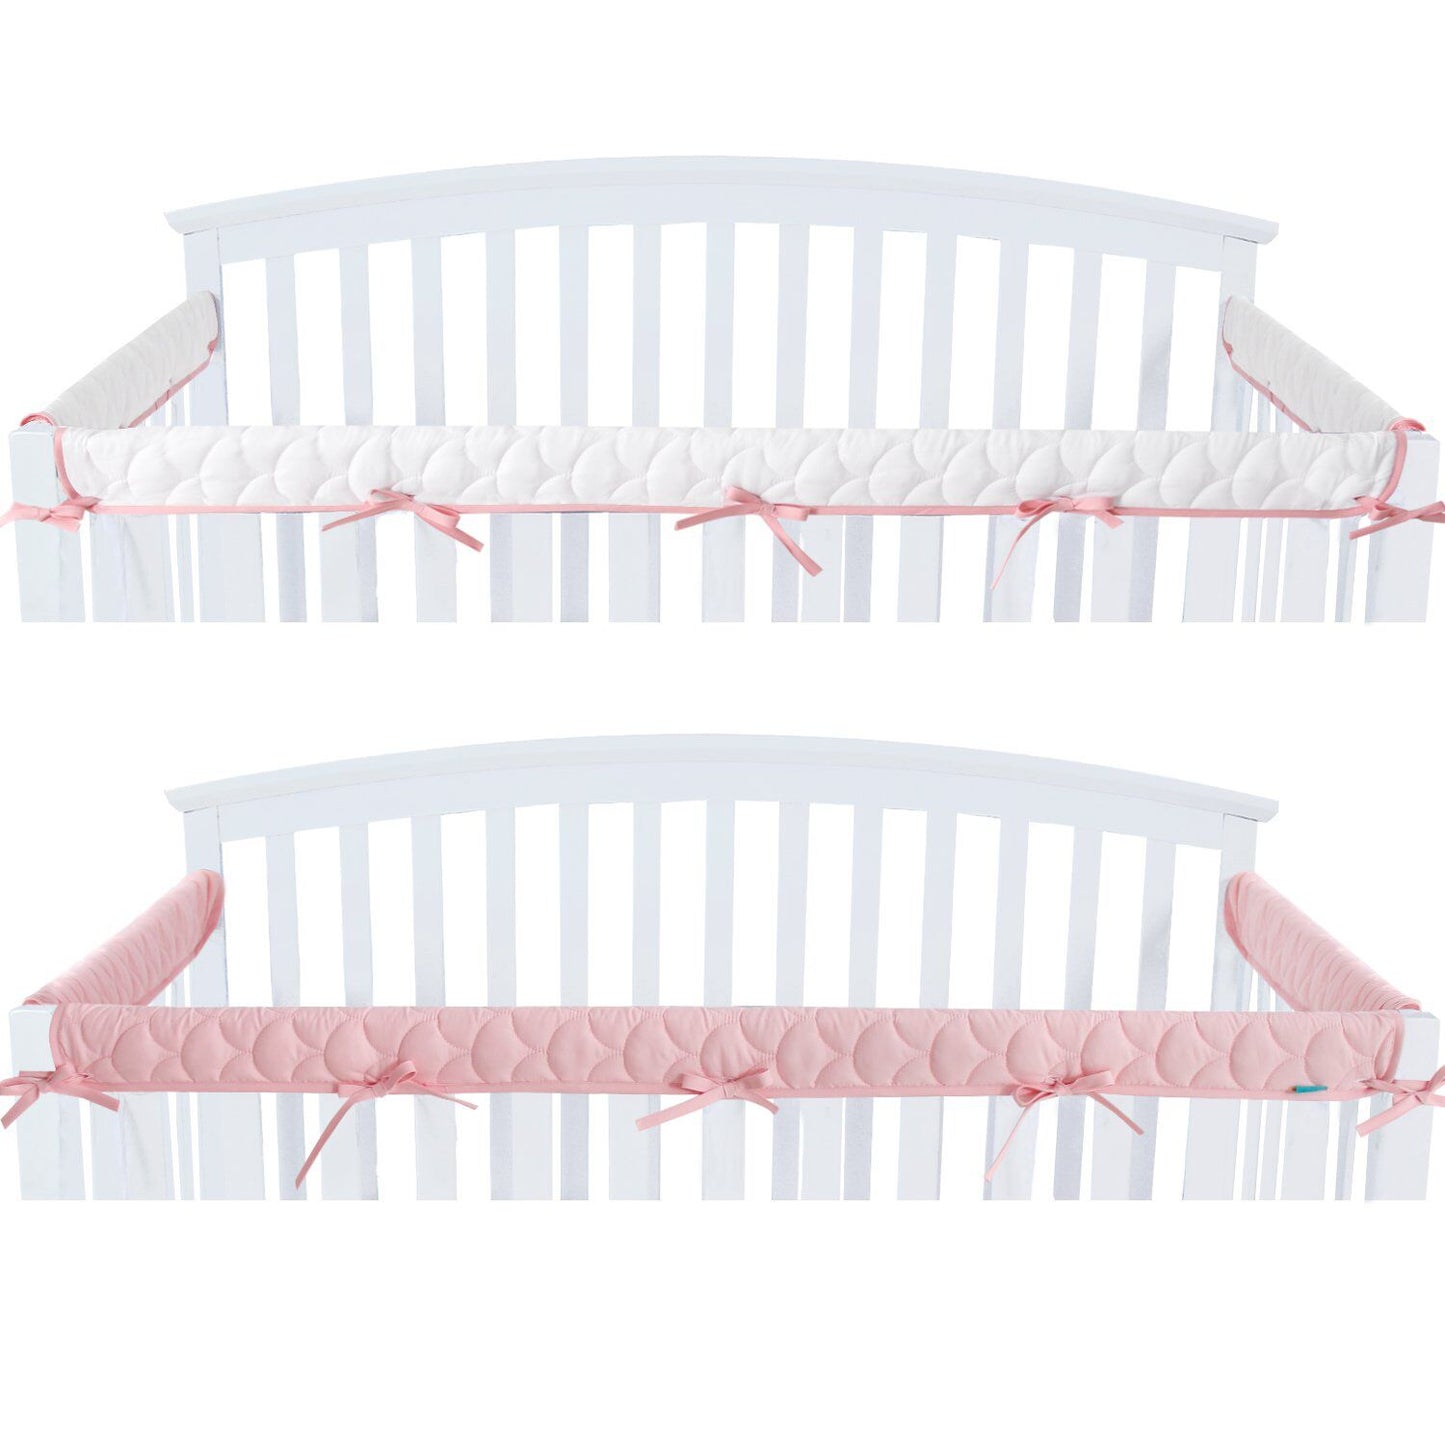 3 Pieces Quilted Crib Rail Cover - Protector Safe Teething Guard Wrap, Reversible, Fit Side and Front Rails, Pink & White - Biloban Online Store